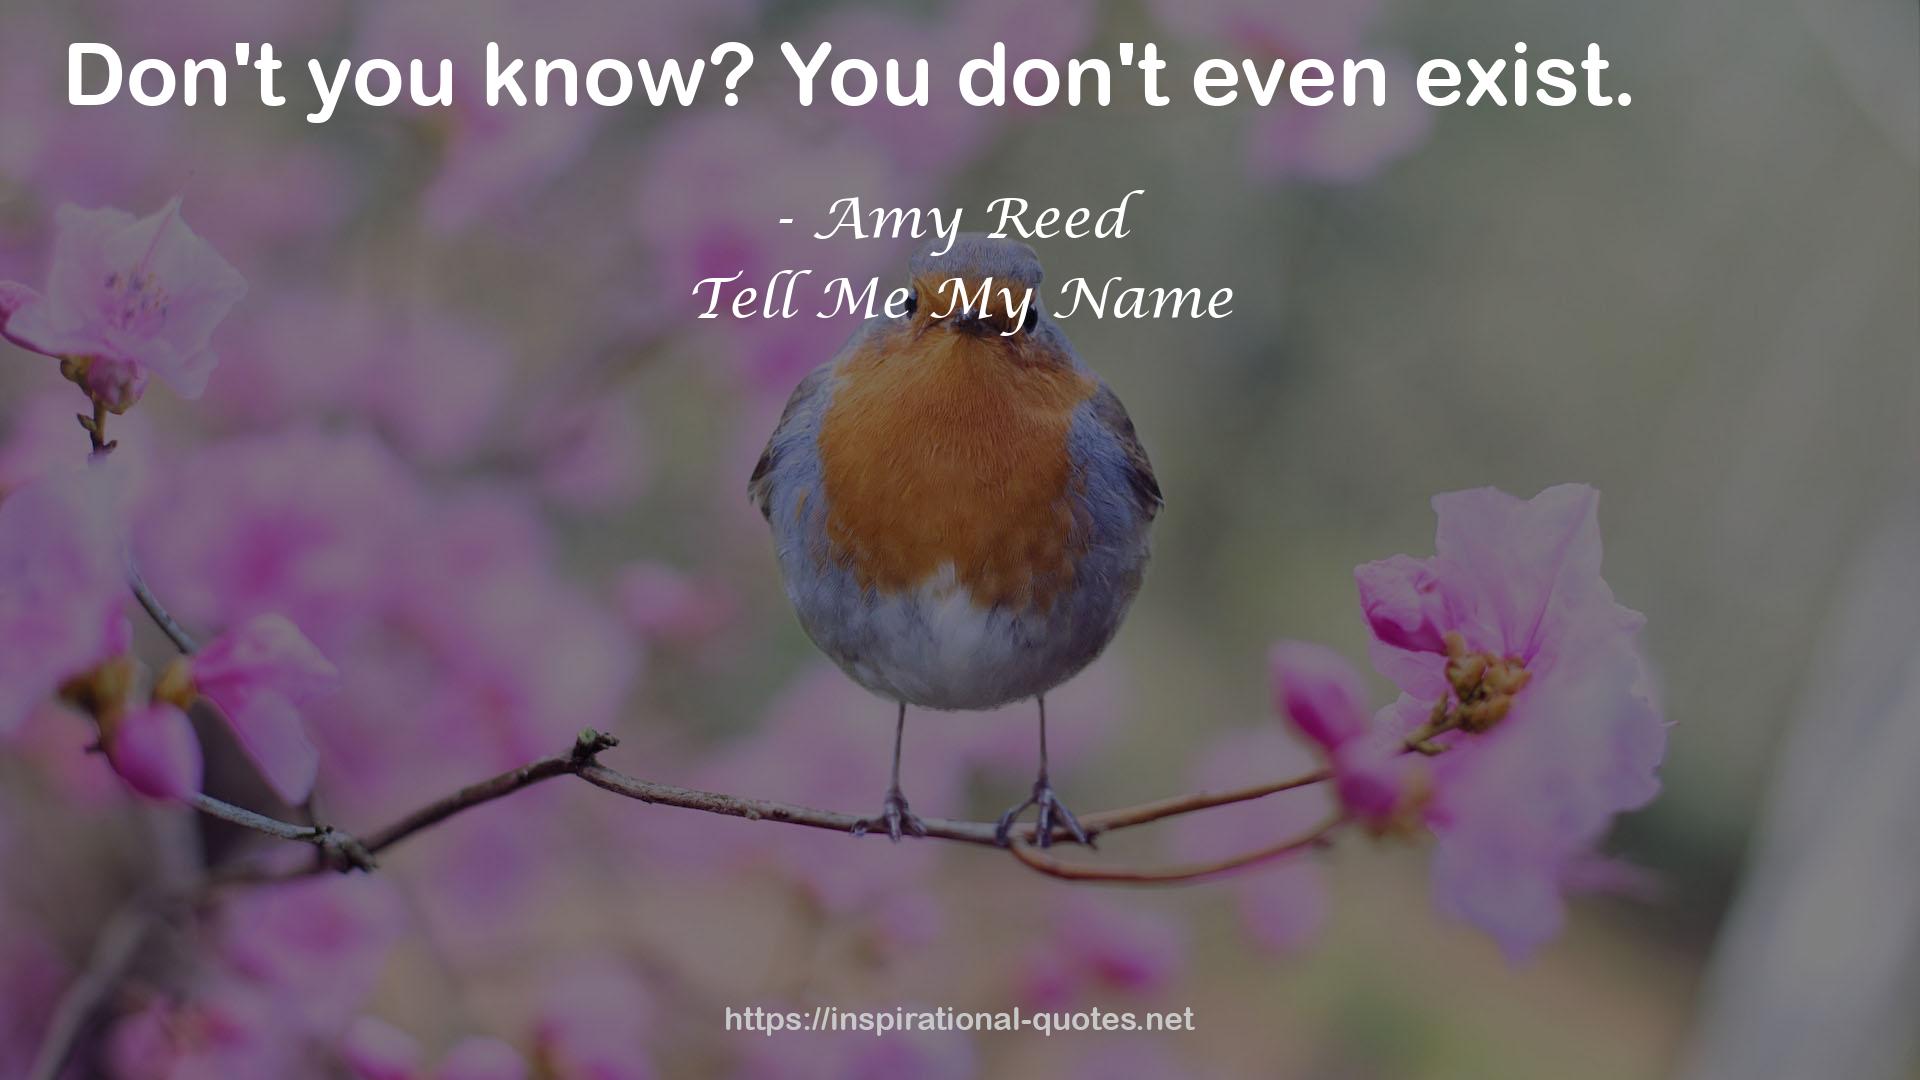 Amy Reed QUOTES